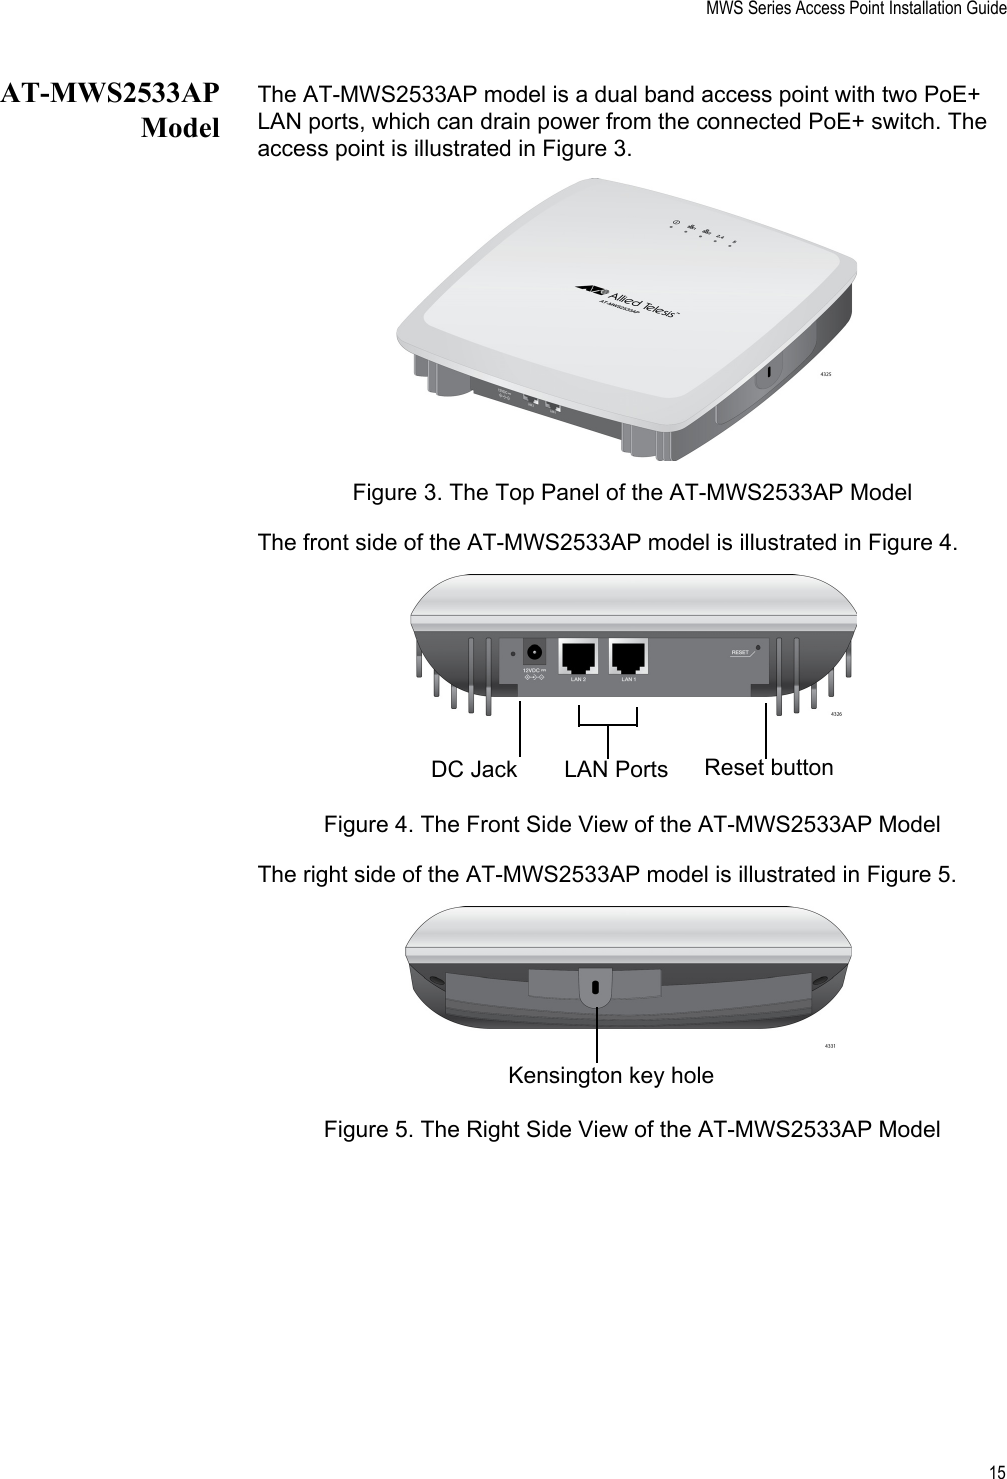 MWS Series Access Point Installation Guide15AT-MWS2533APModelThe AT-MWS2533AP model is a dual band access point with two PoE+ LAN ports, which can drain power from the connected PoE+ switch. The access point is illustrated in Figure 3. Figure 3. The Top Panel of the AT-MWS2533AP ModelThe front side of the AT-MWS2533AP model is illustrated in Figure 4.Figure 4. The Front Side View of the AT-MWS2533AP ModelThe right side of the AT-MWS2533AP model is illustrated in Figure 5.Figure 5. The Right Side View of the AT-MWS2533AP ModelLAN PortsDC Jack Reset buttonKensington key hole